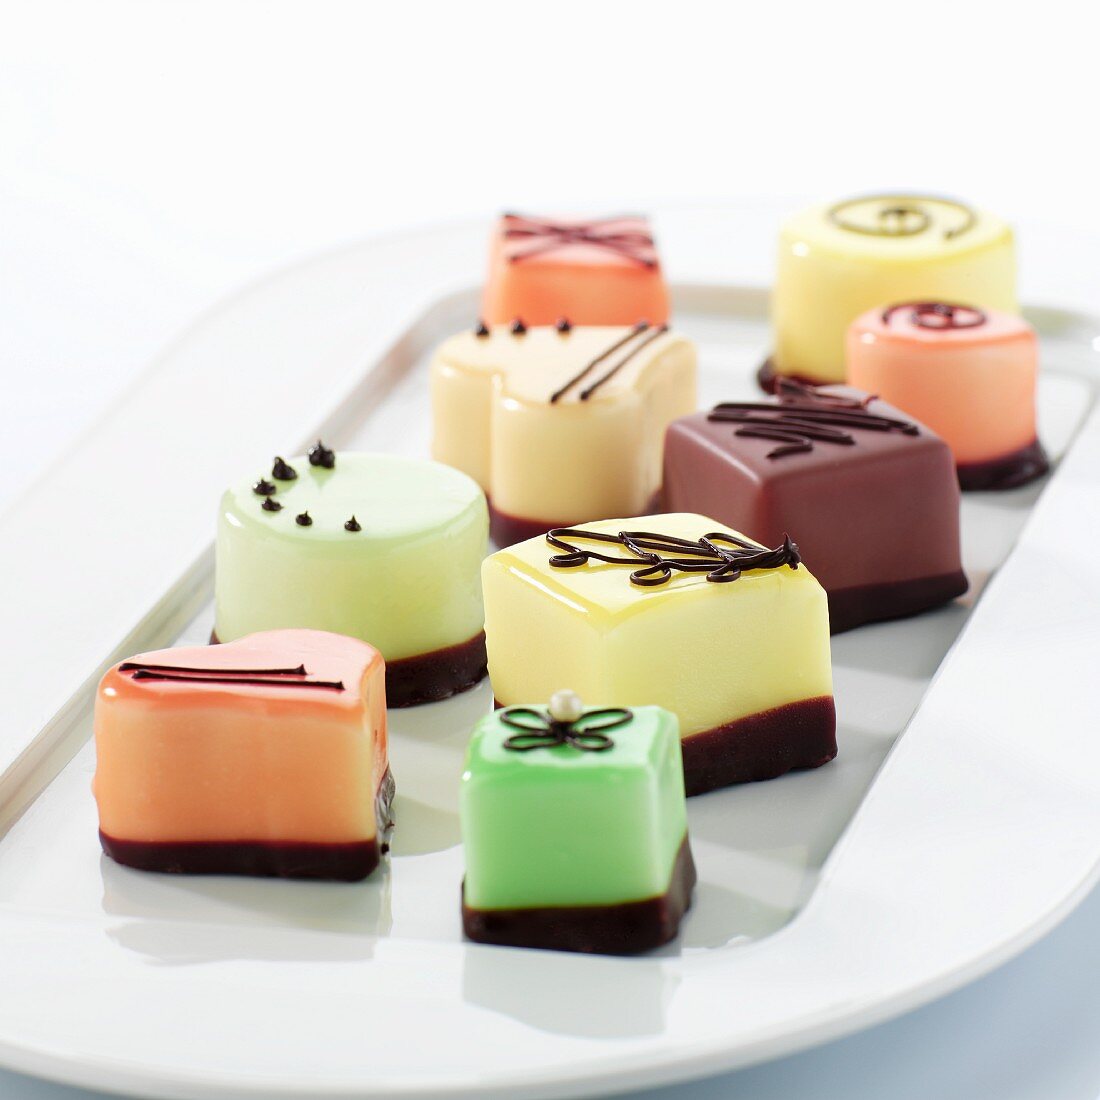 Assorted petit fours on a serving plate